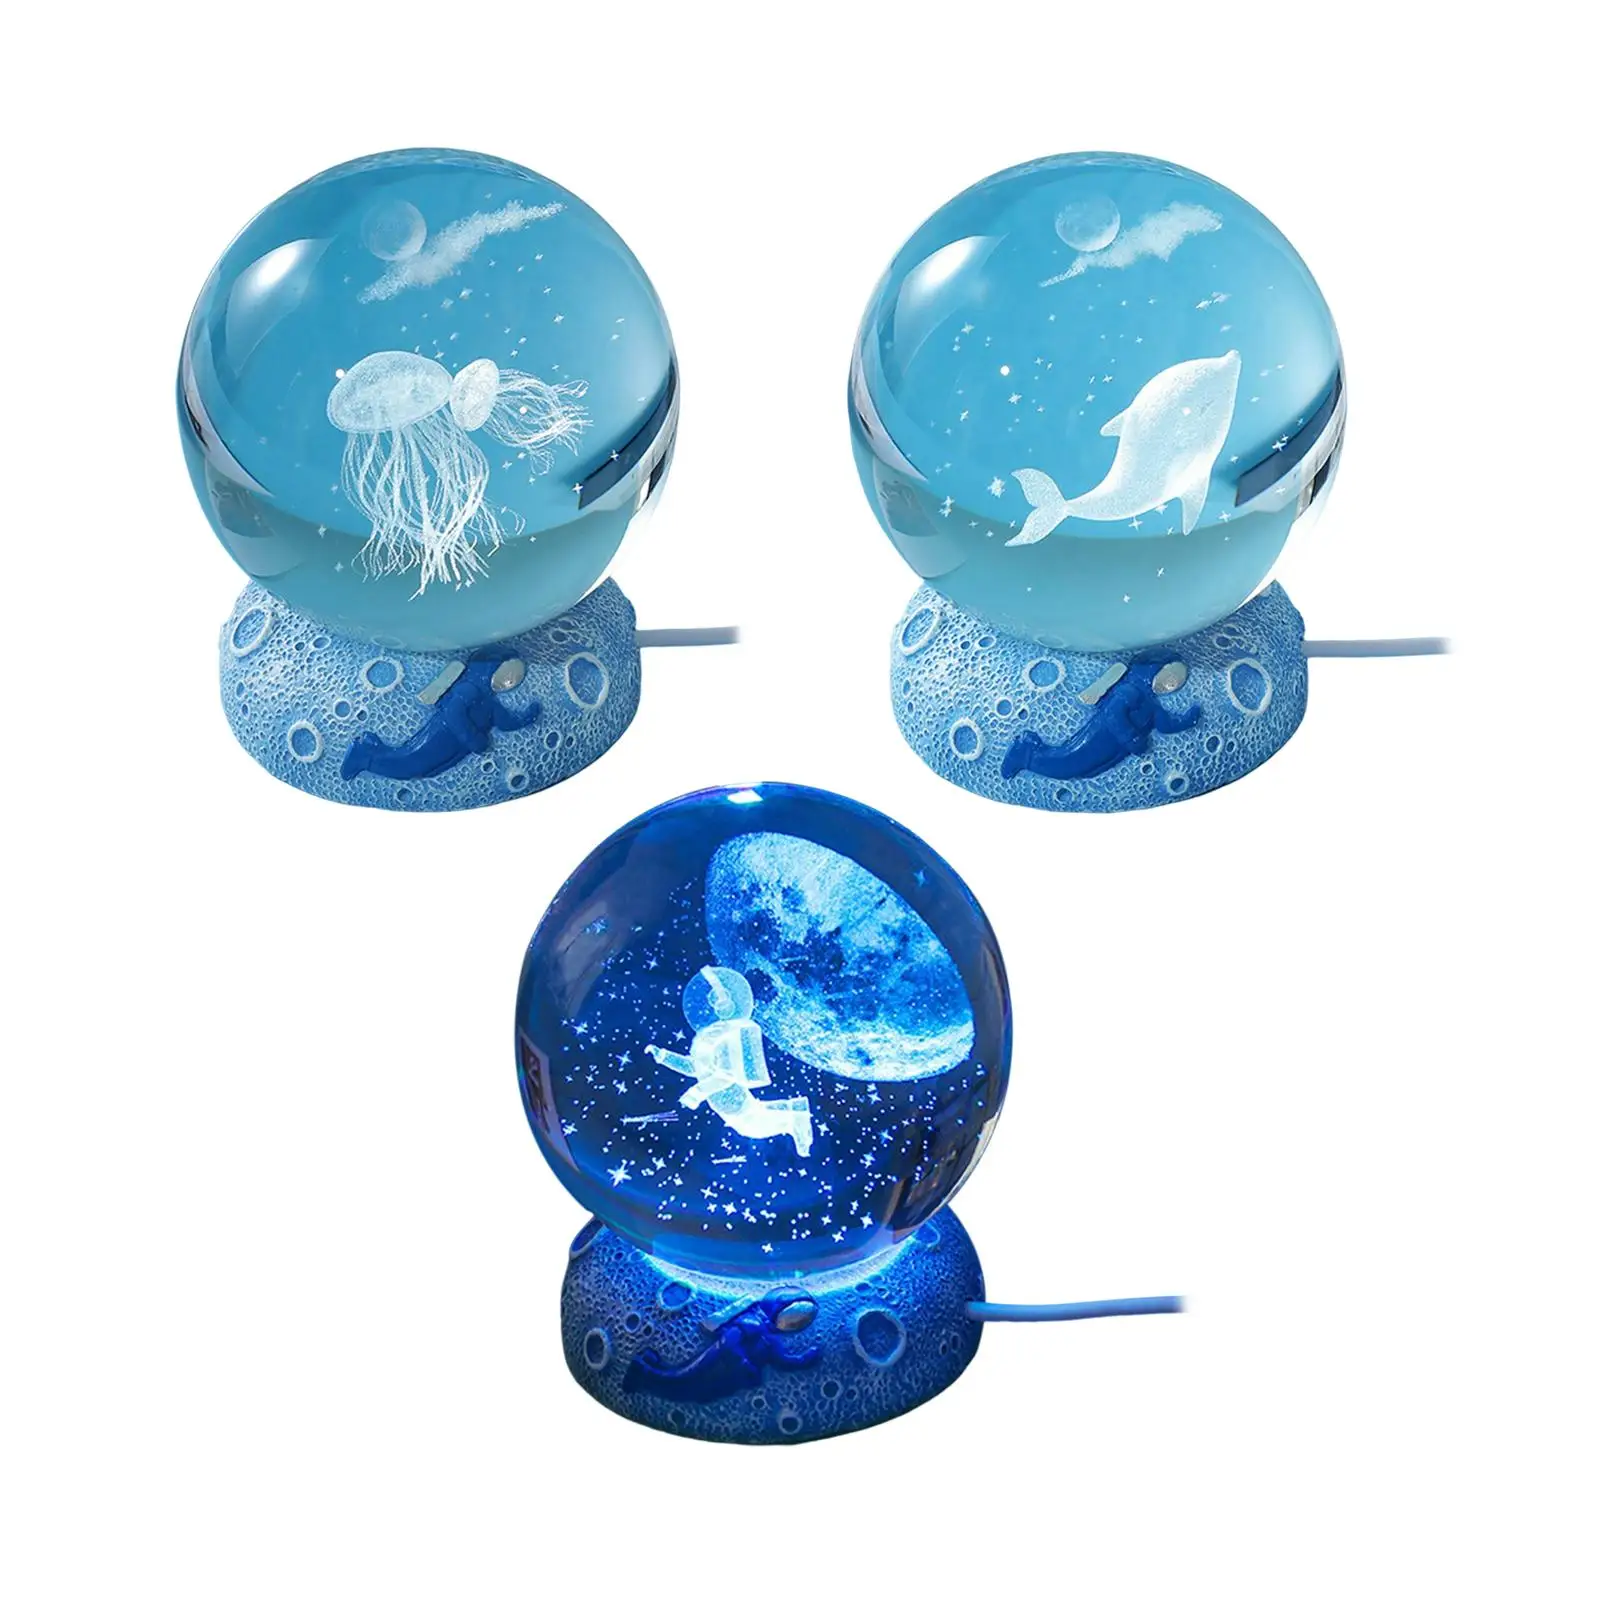 Modern Ball Night Light with Resin Base Bedside Lamp Decorative Moon Light for Bedroom Living Room Home Decor Ornament